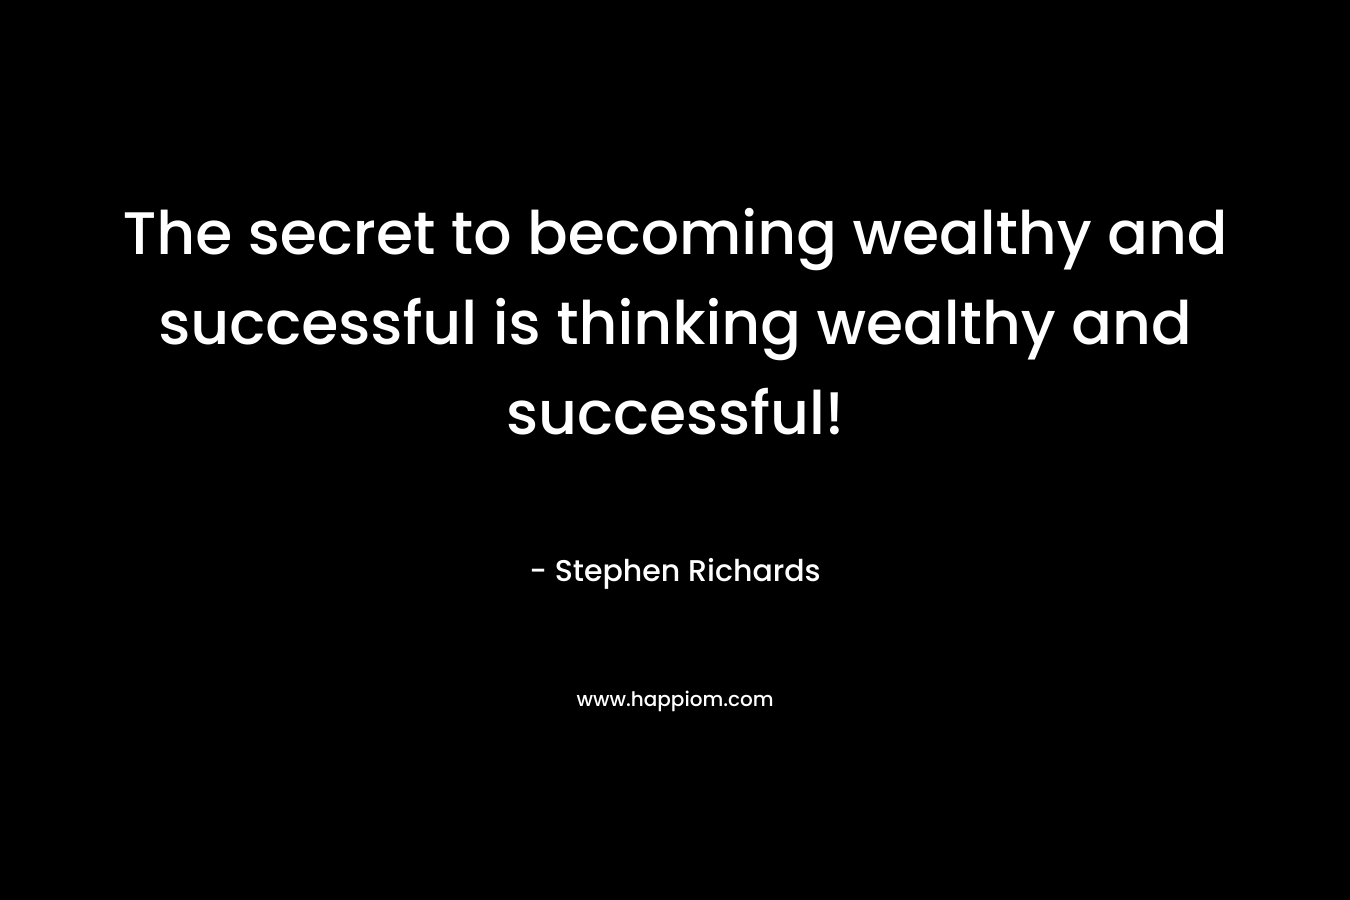 The secret to becoming wealthy and successful is thinking wealthy and successful!